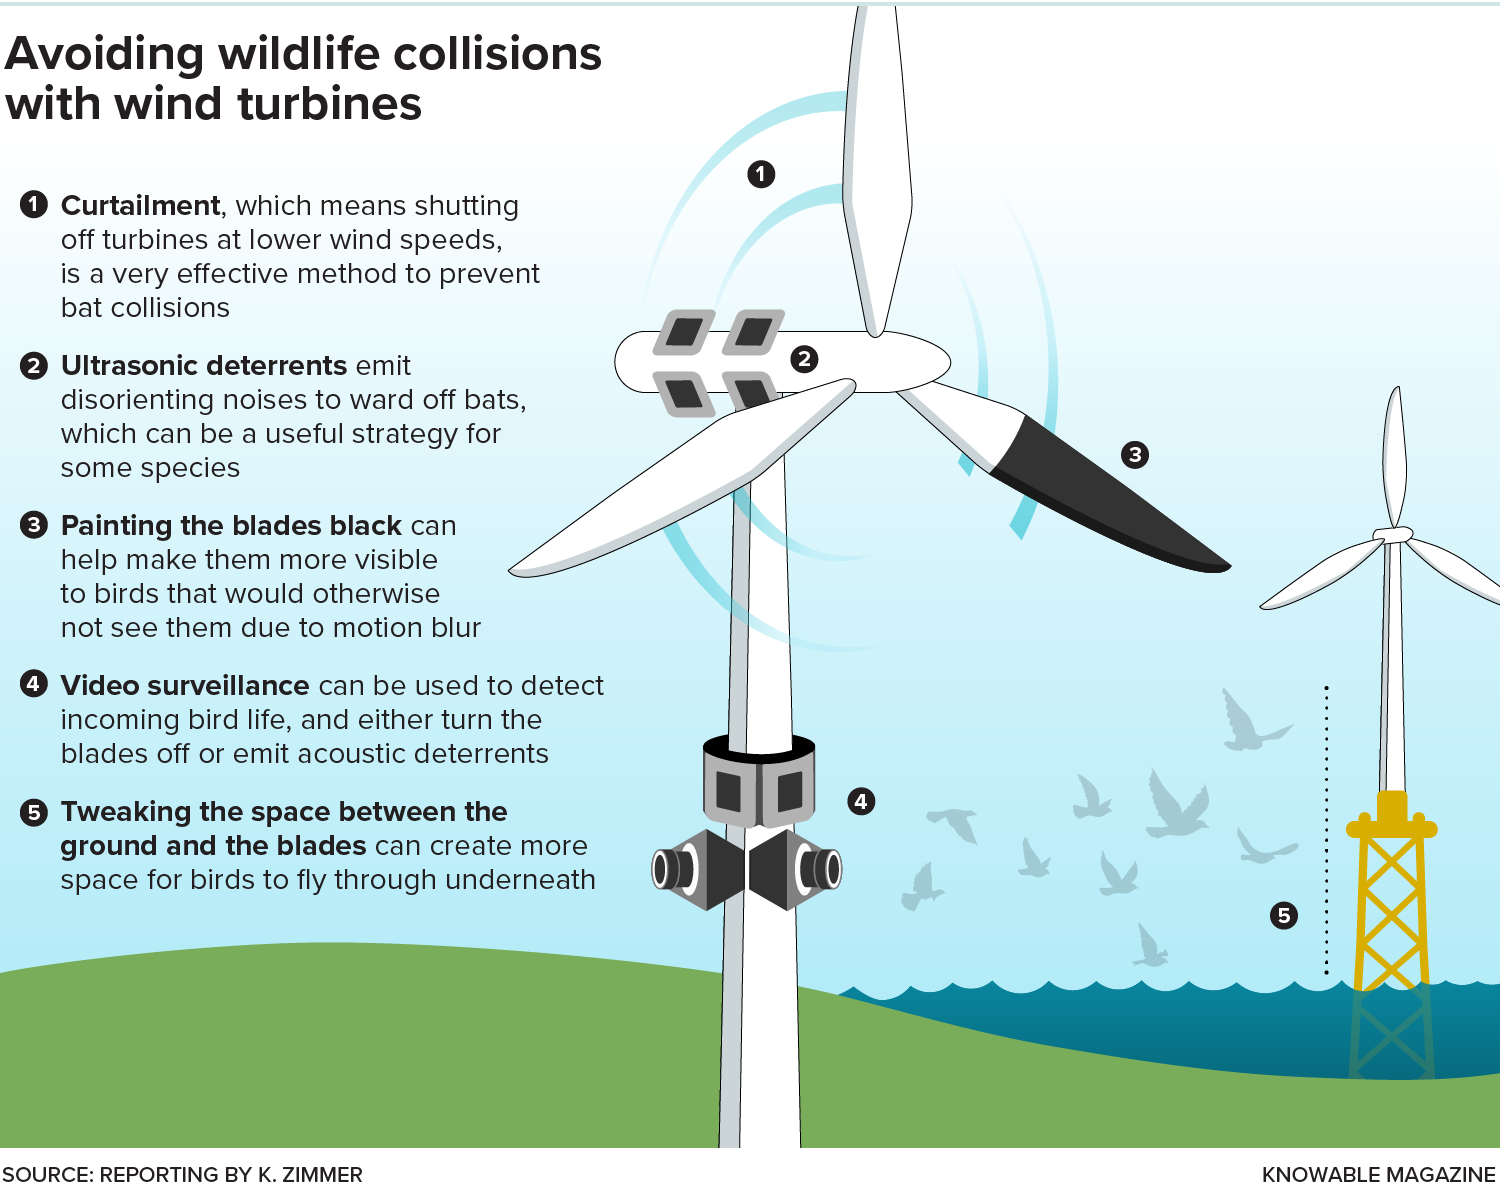 Scientists are exploring a number of ways to reduce the impact of wind turbine facilities on wildlife. Some solutions — such as curtailment — are ready to be implemented, while others are still under investigation.